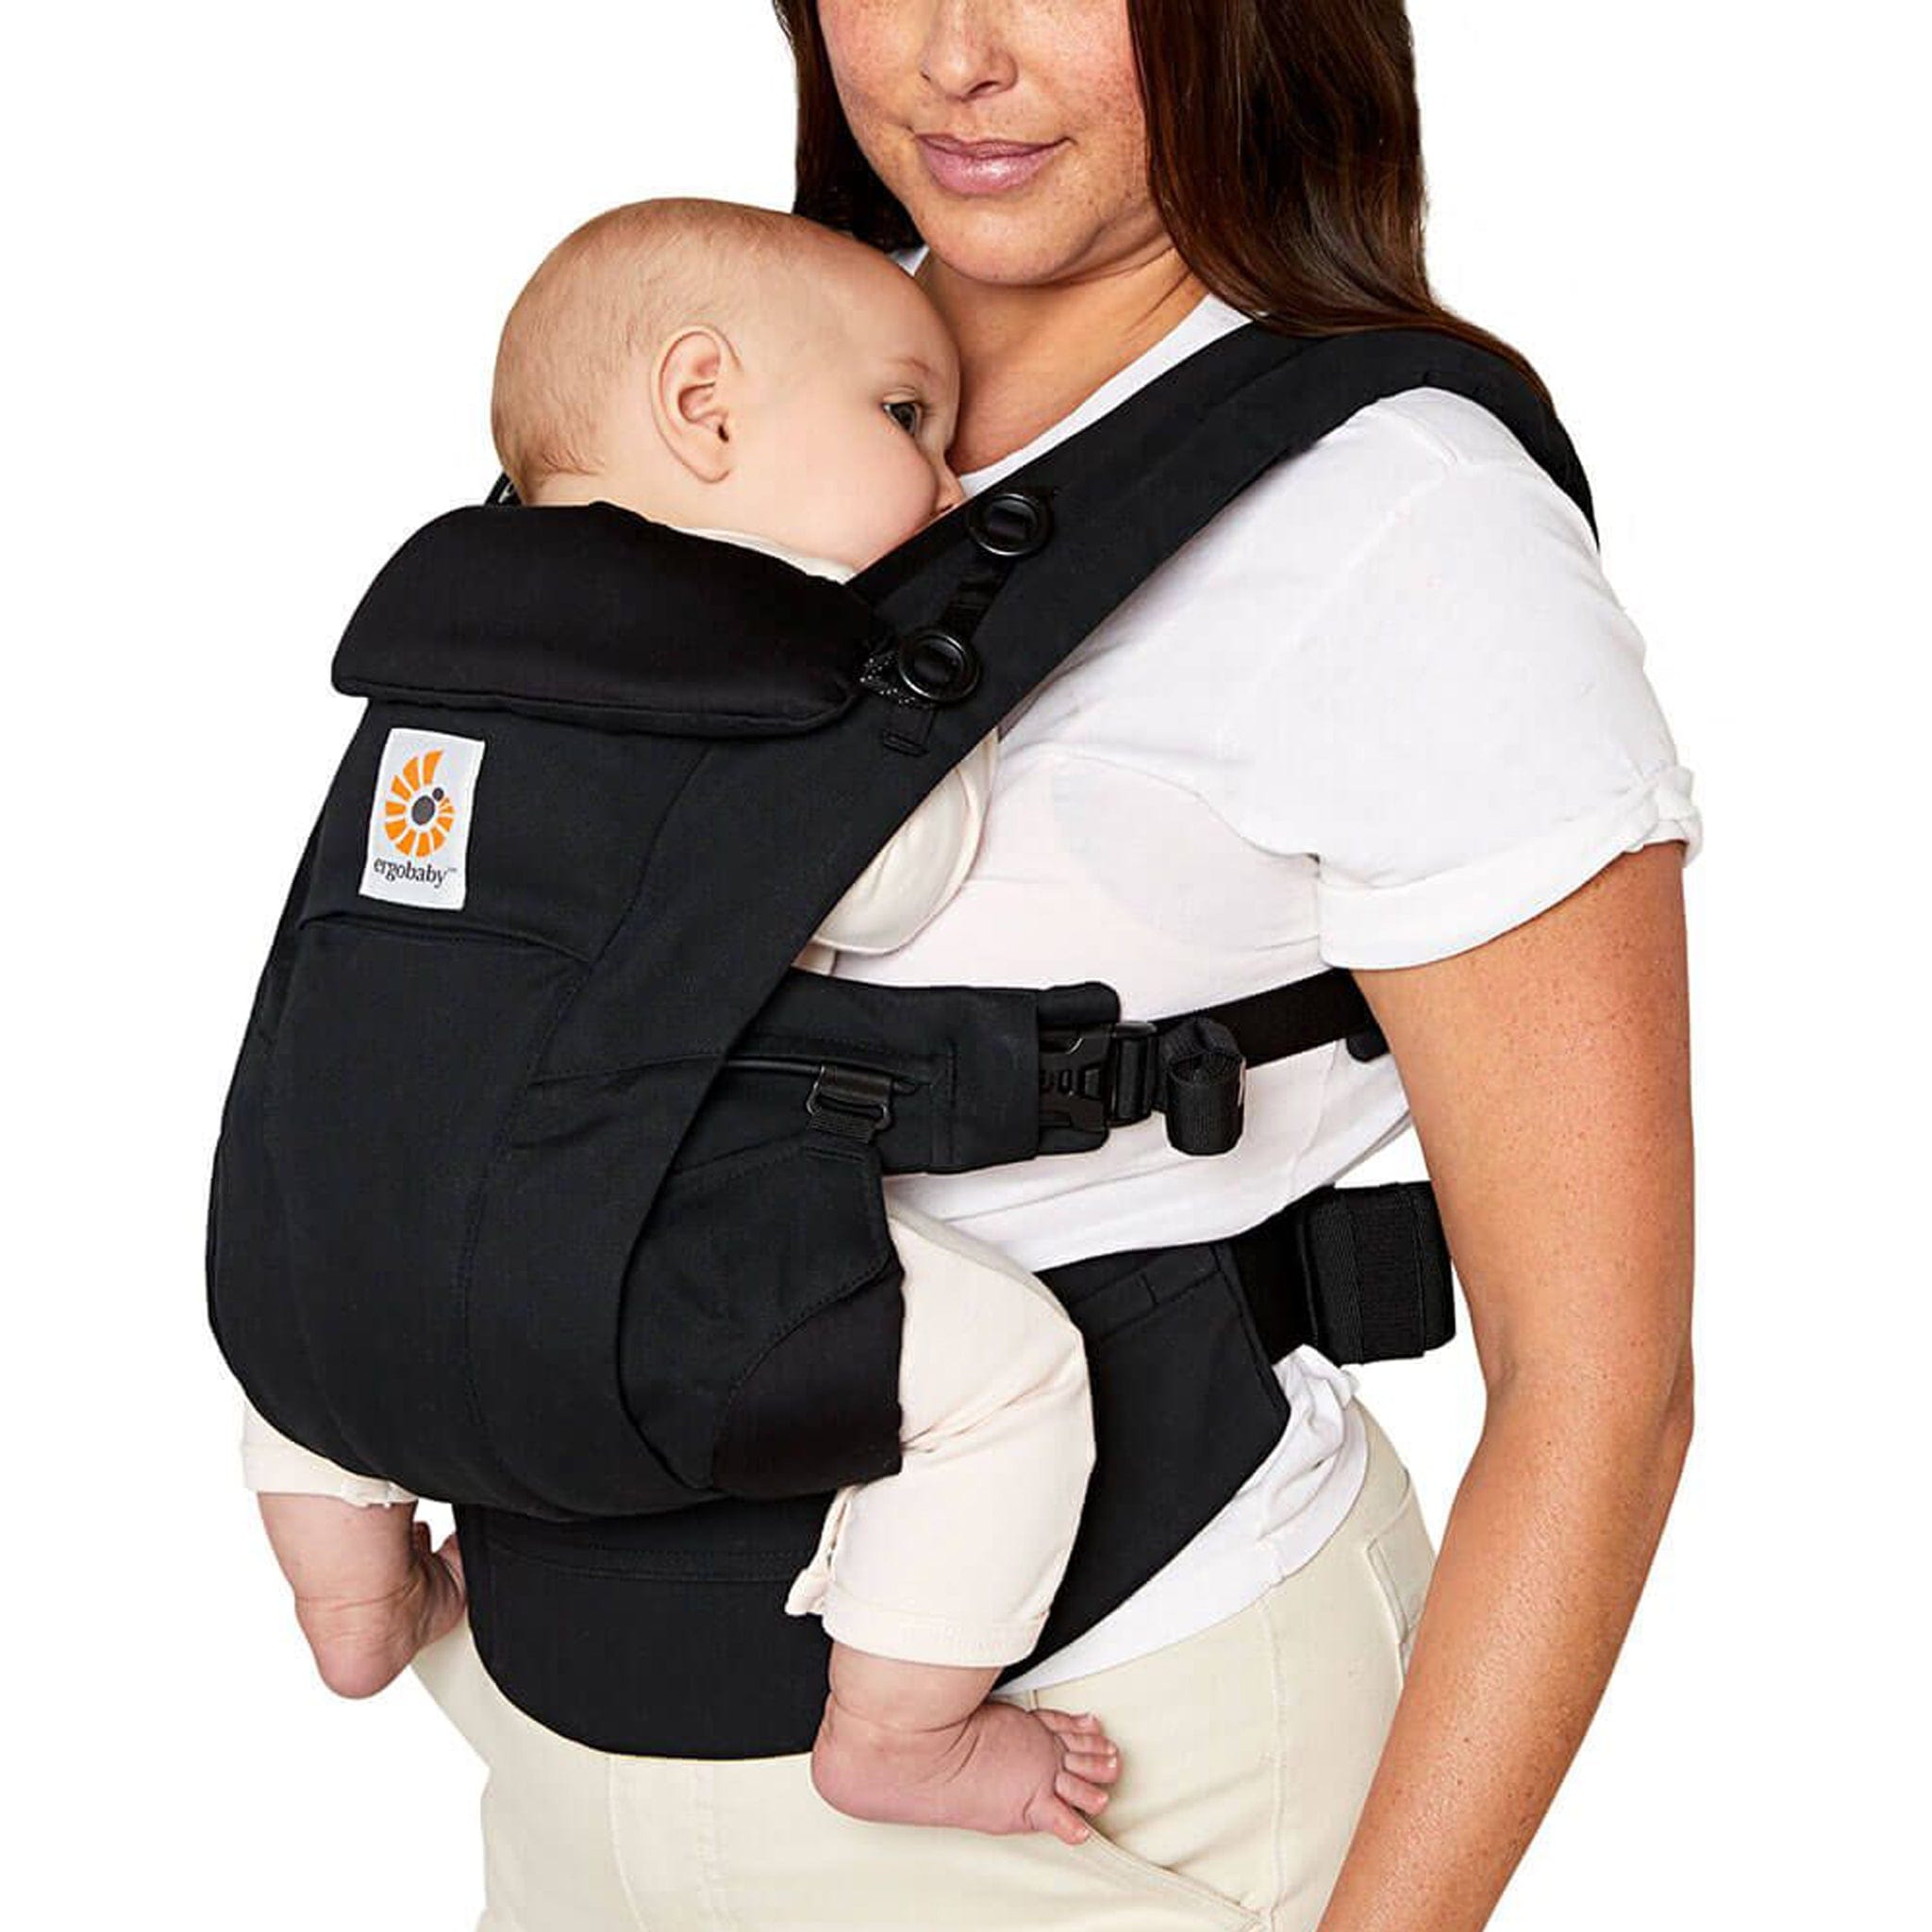 Ergobaby baby carriers Ergobaby Omni Dream Carrier in Onyx Black BCDRONYX